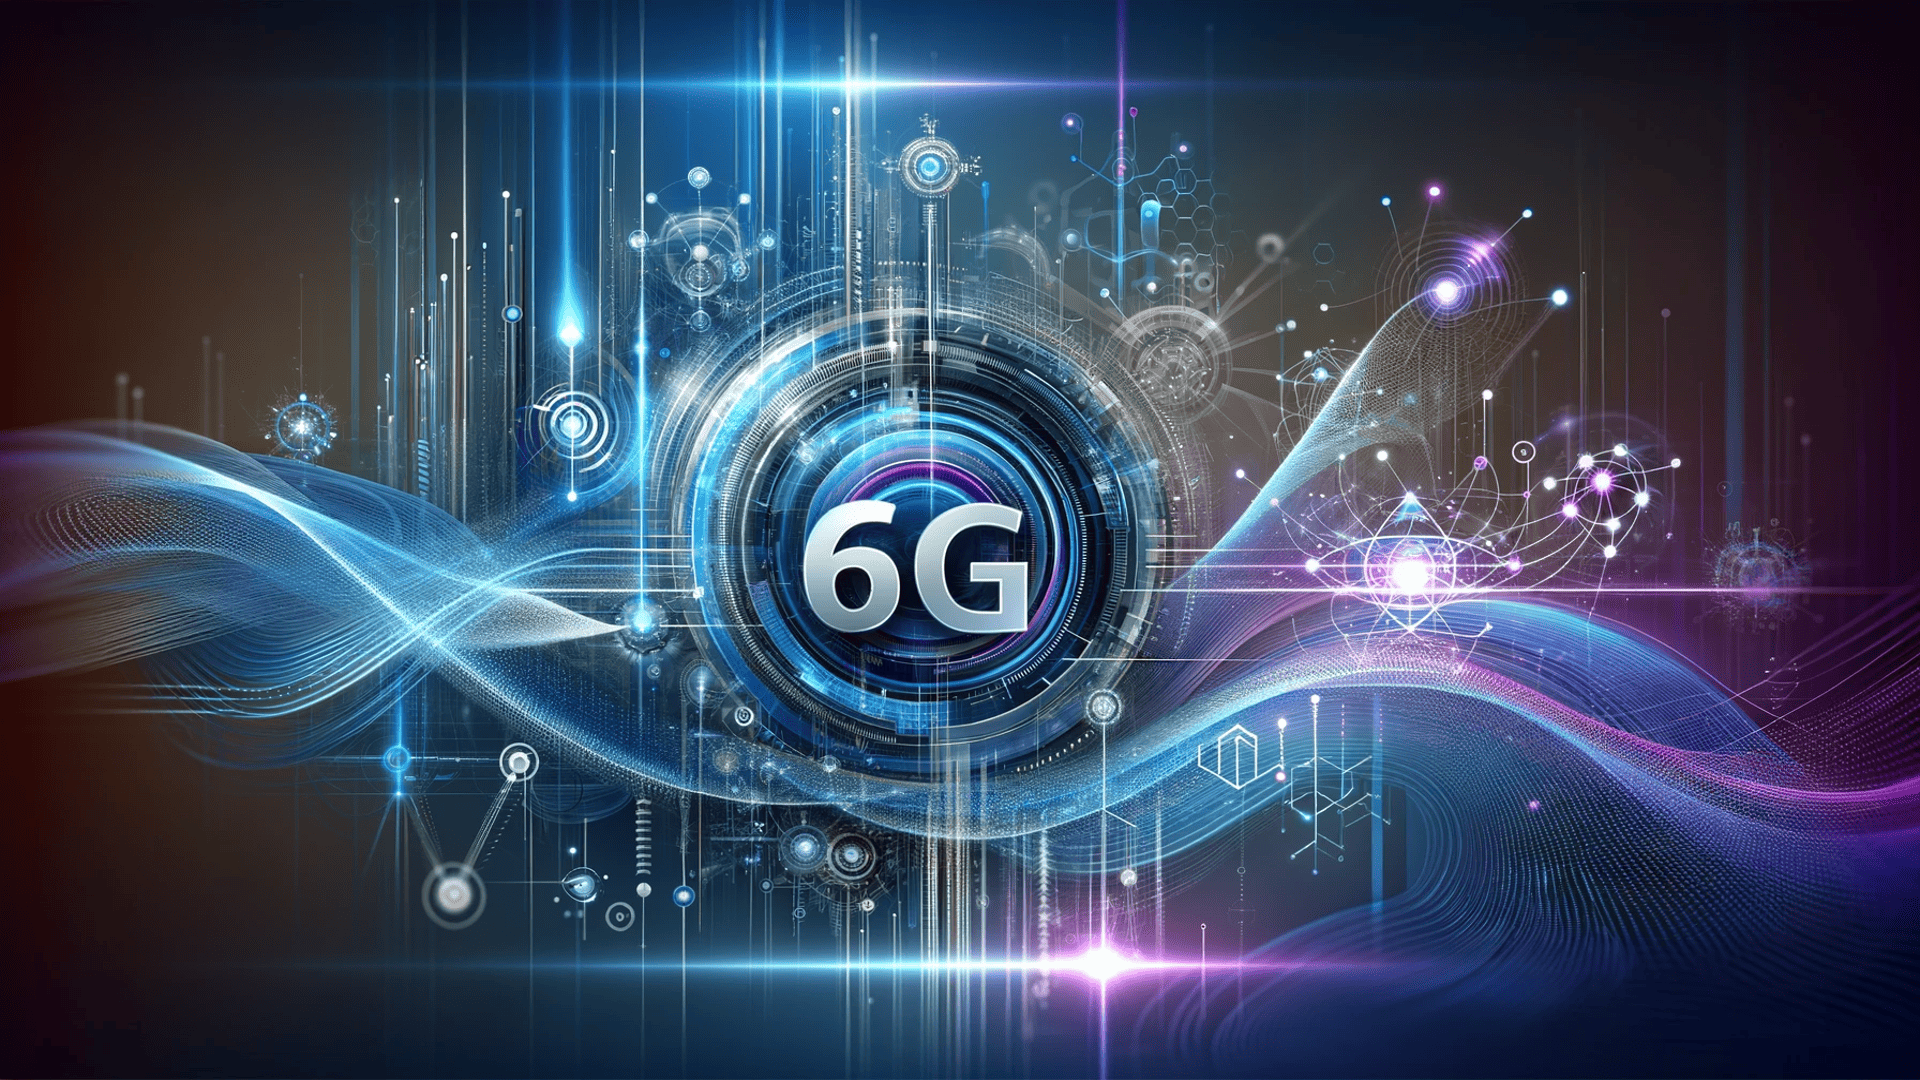 What Is The Significance Of 6g Technology In The Future Of Wireless Communication